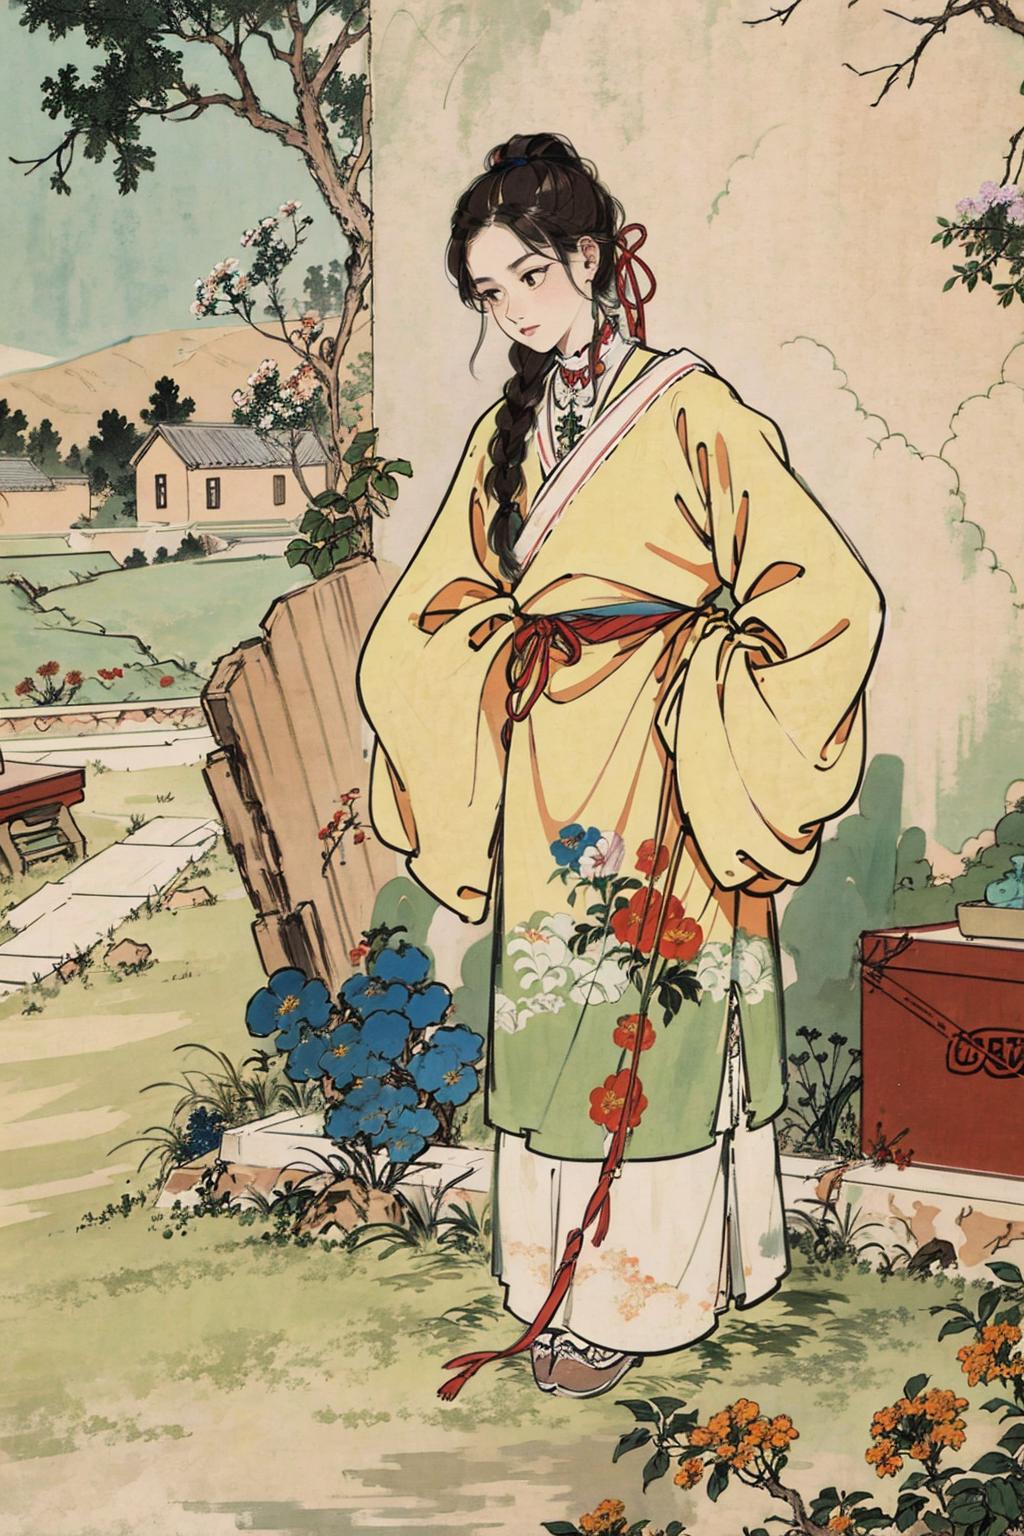 An Asian Woman with Flowers on Her Dress, Standing in a Garden